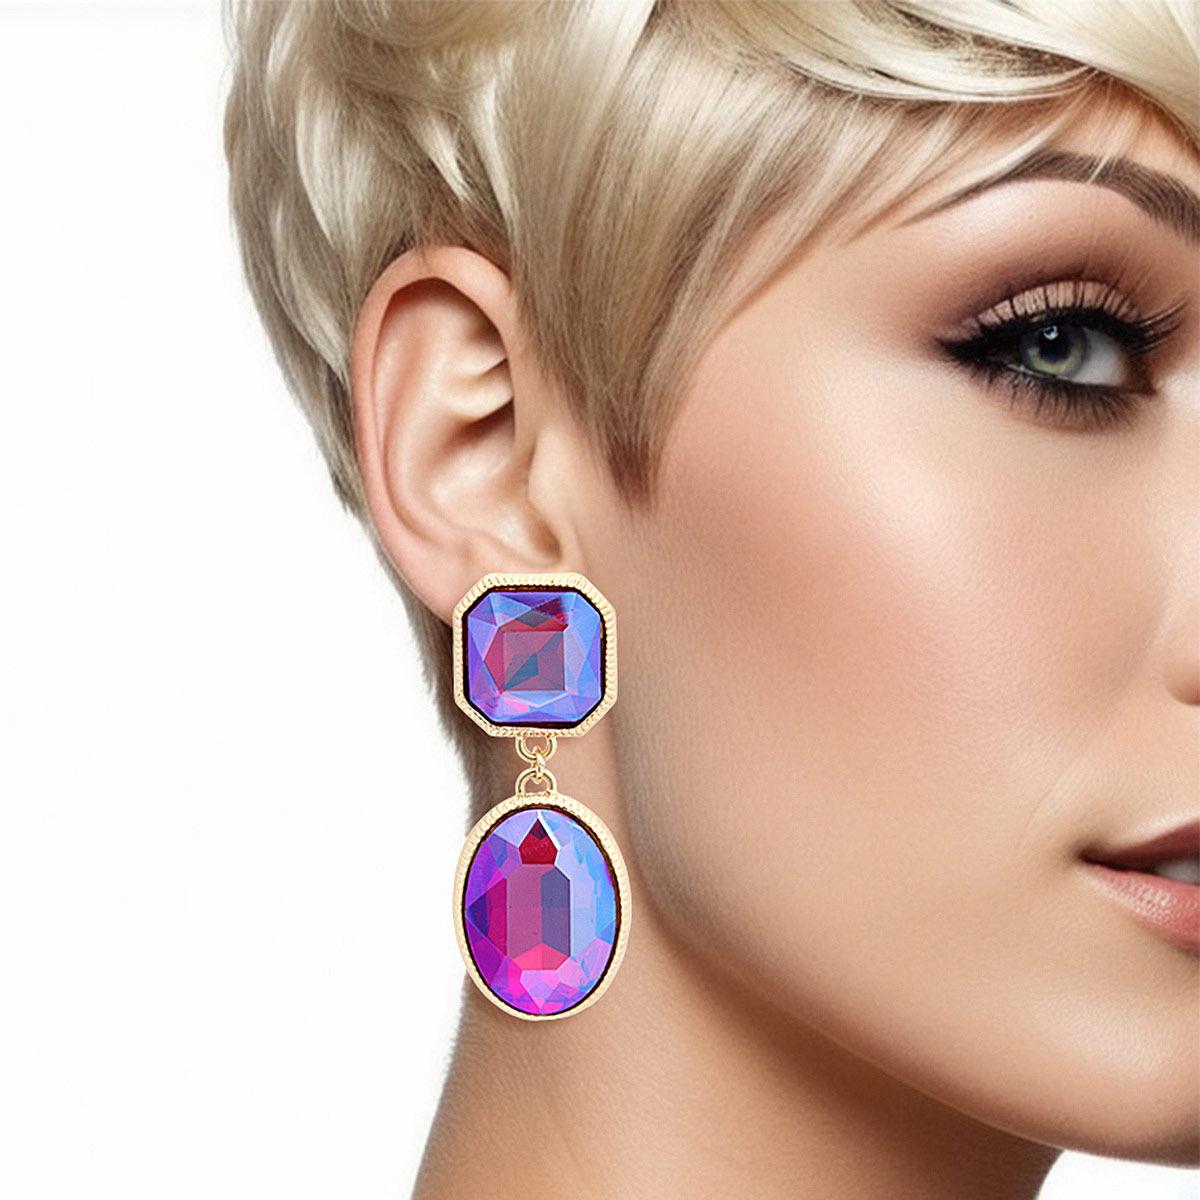 Get Noticed: Purple-Fuchsia Clip-On Earrings for Instant Glam!